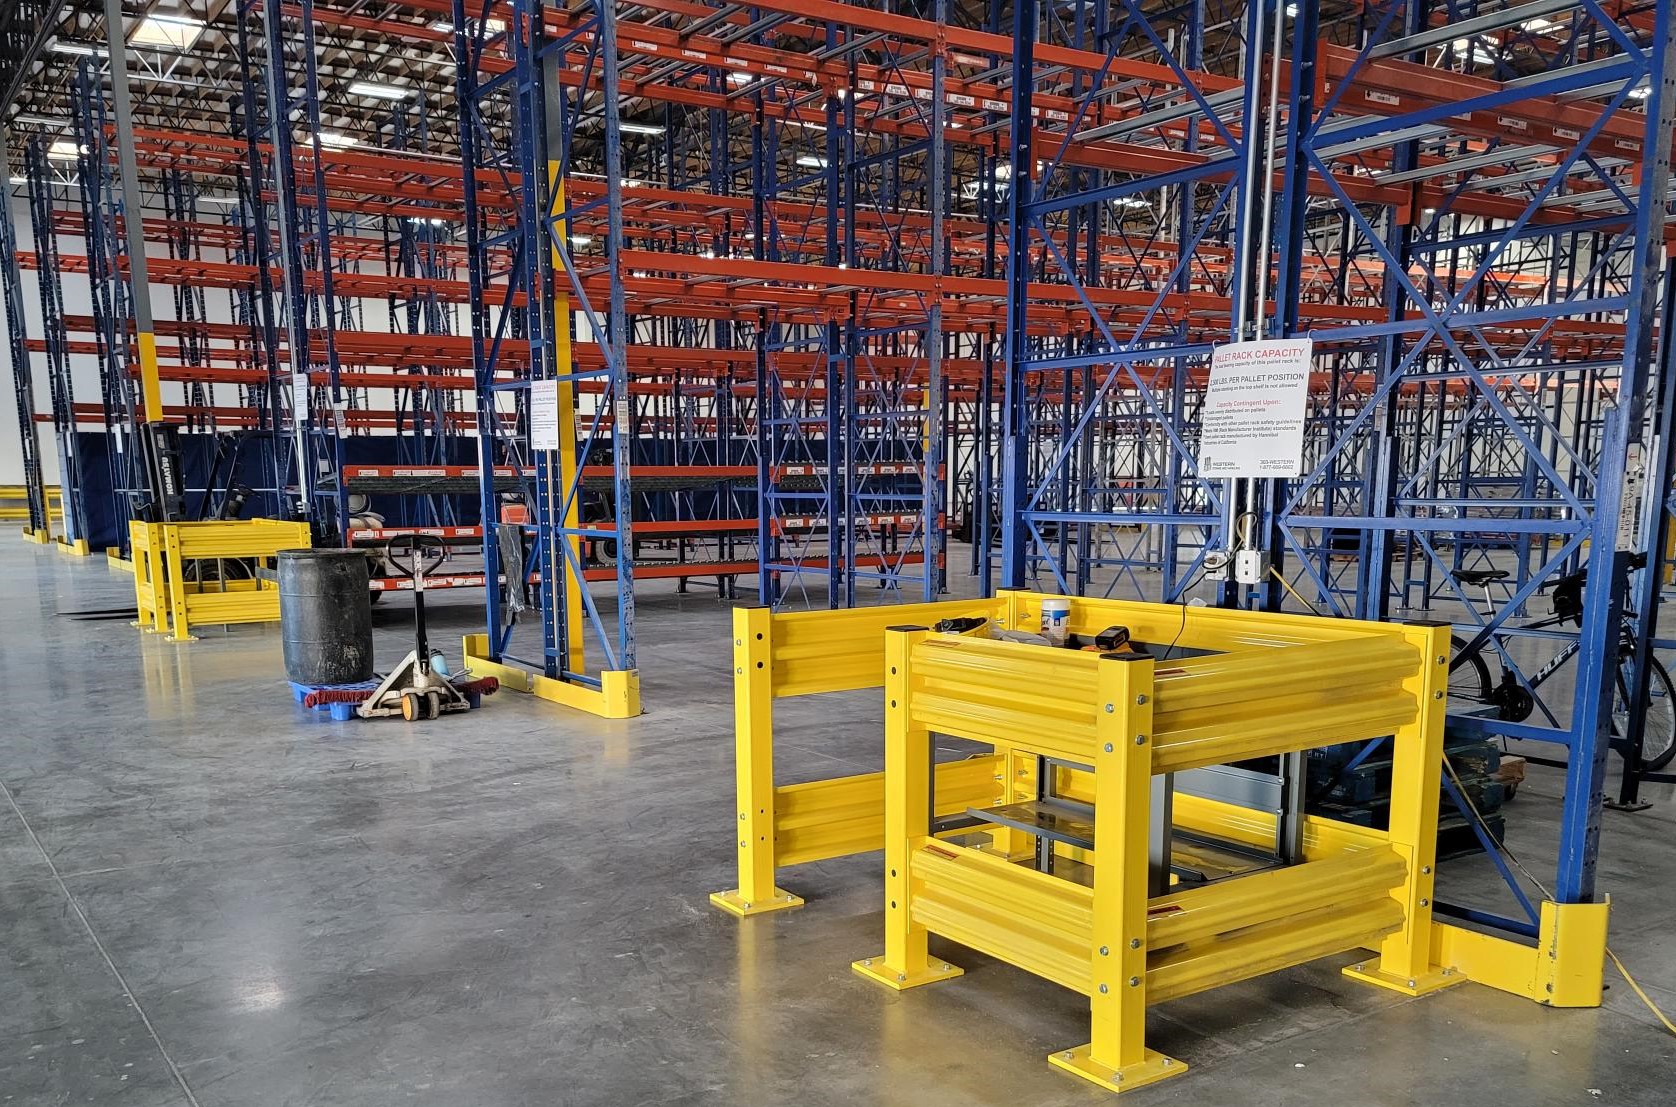 Pallet Rack Guard Rails Guard Rails  Rack Guard Rails  Heartland Steel  WHS  Western Storage and Handling  pallet structures  pallet rack protection  bolted rack guards  rack guards